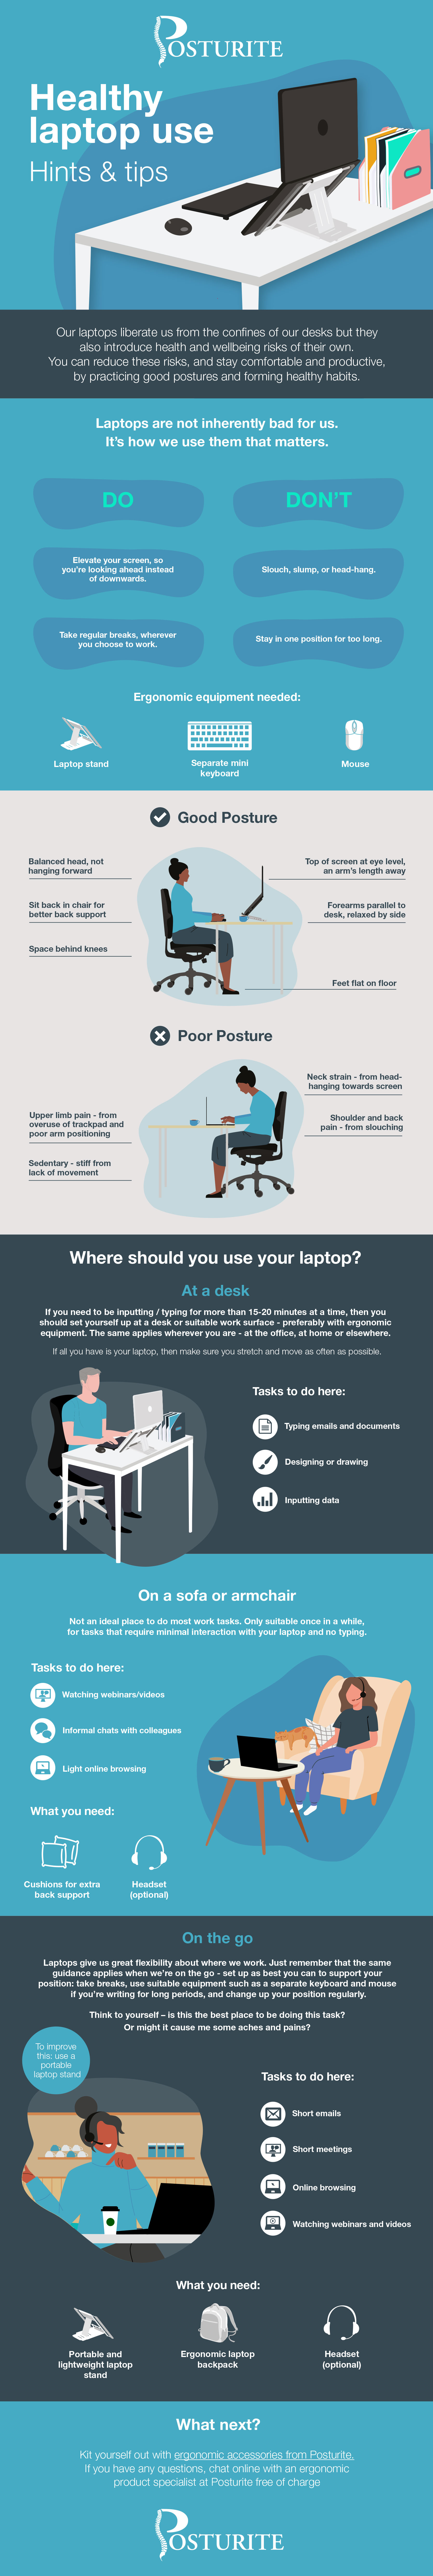 Healthy laptop use infographic 